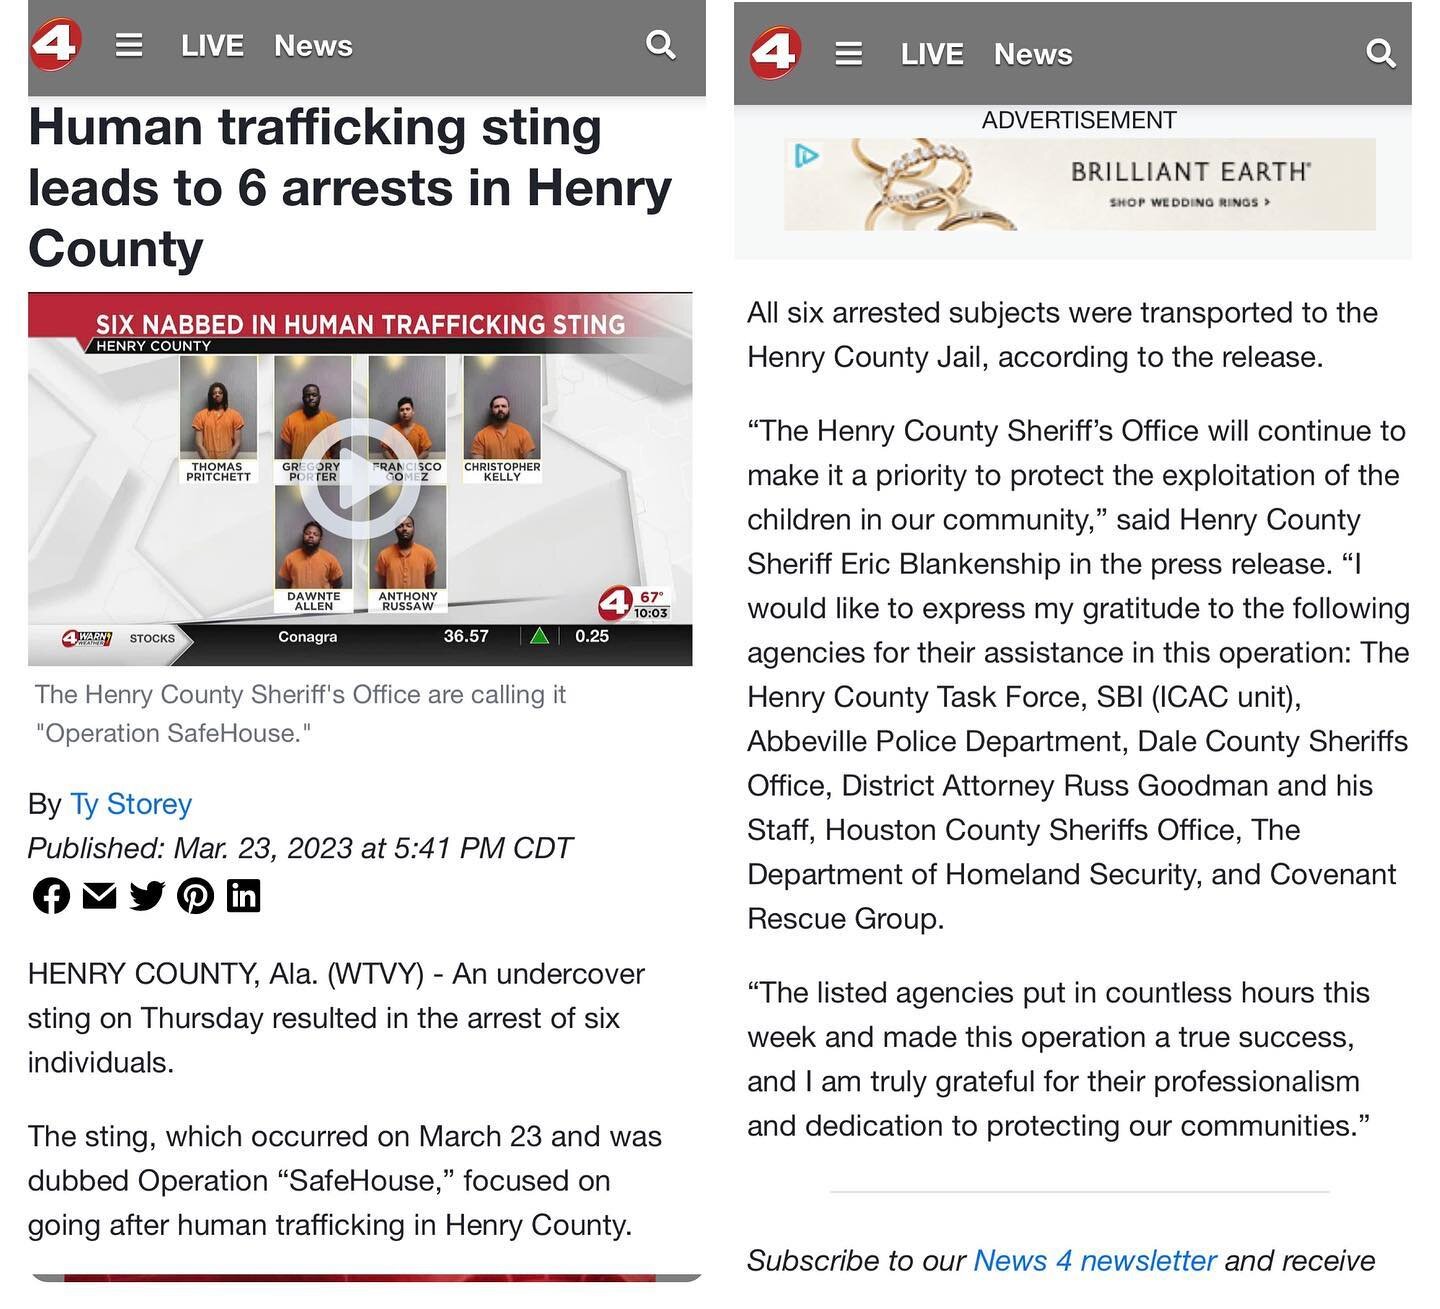 Always good getting bad guys off the street. Last week we worked in conjunction with local LE in Henry County Alabama to assist in the arrest of 6 individuals. It was a successful operation. #humantrafficking #sextrafficking #henrycounty #covenantres